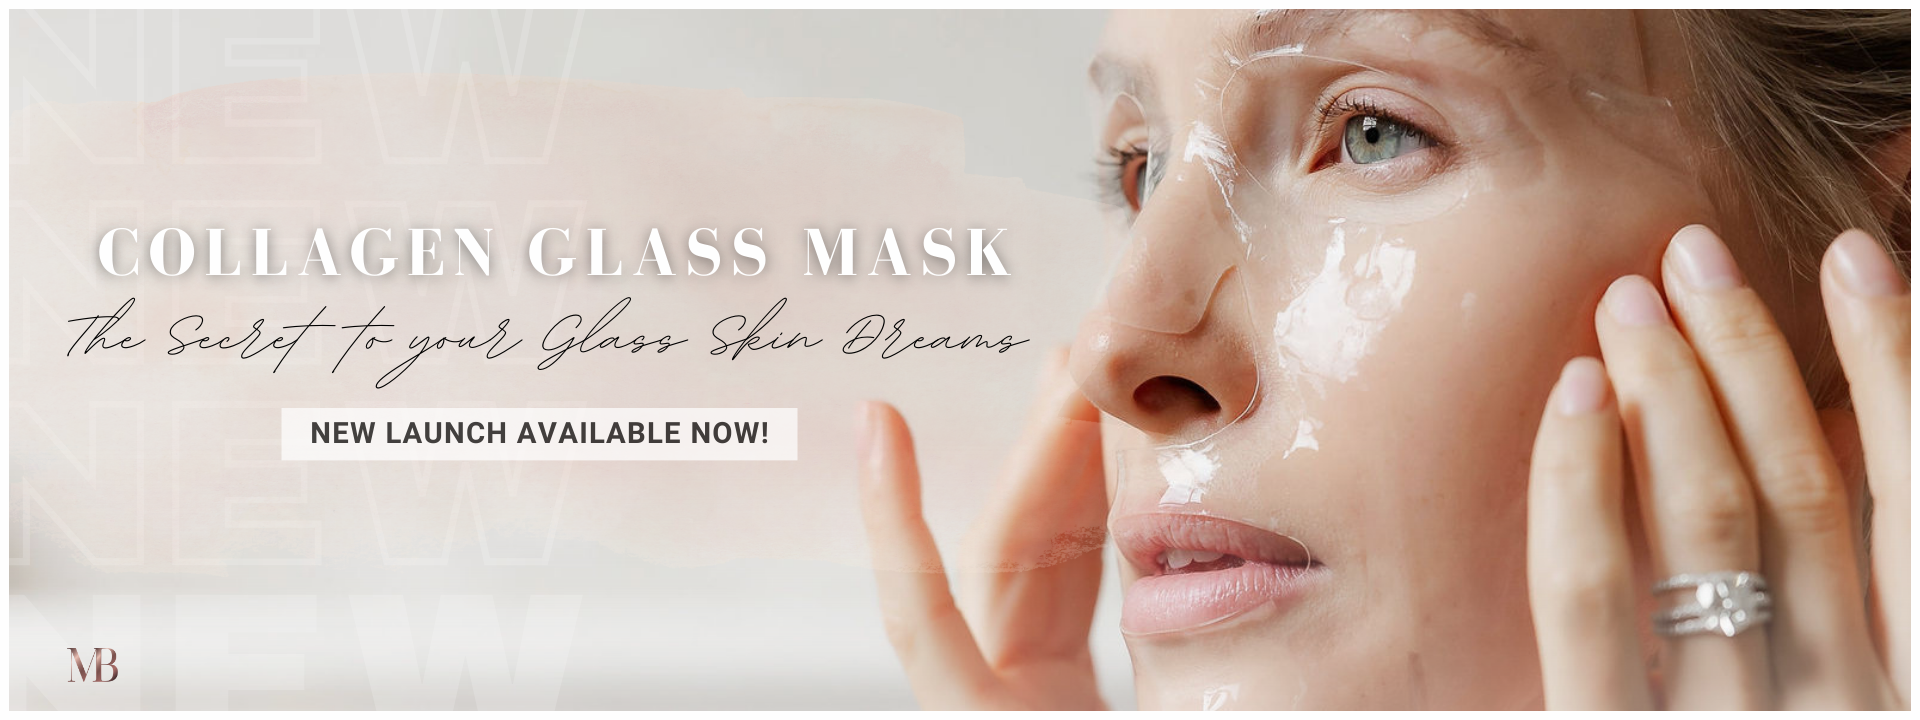 COLLAGEN GLASS MASK (1920 x 720 px).png